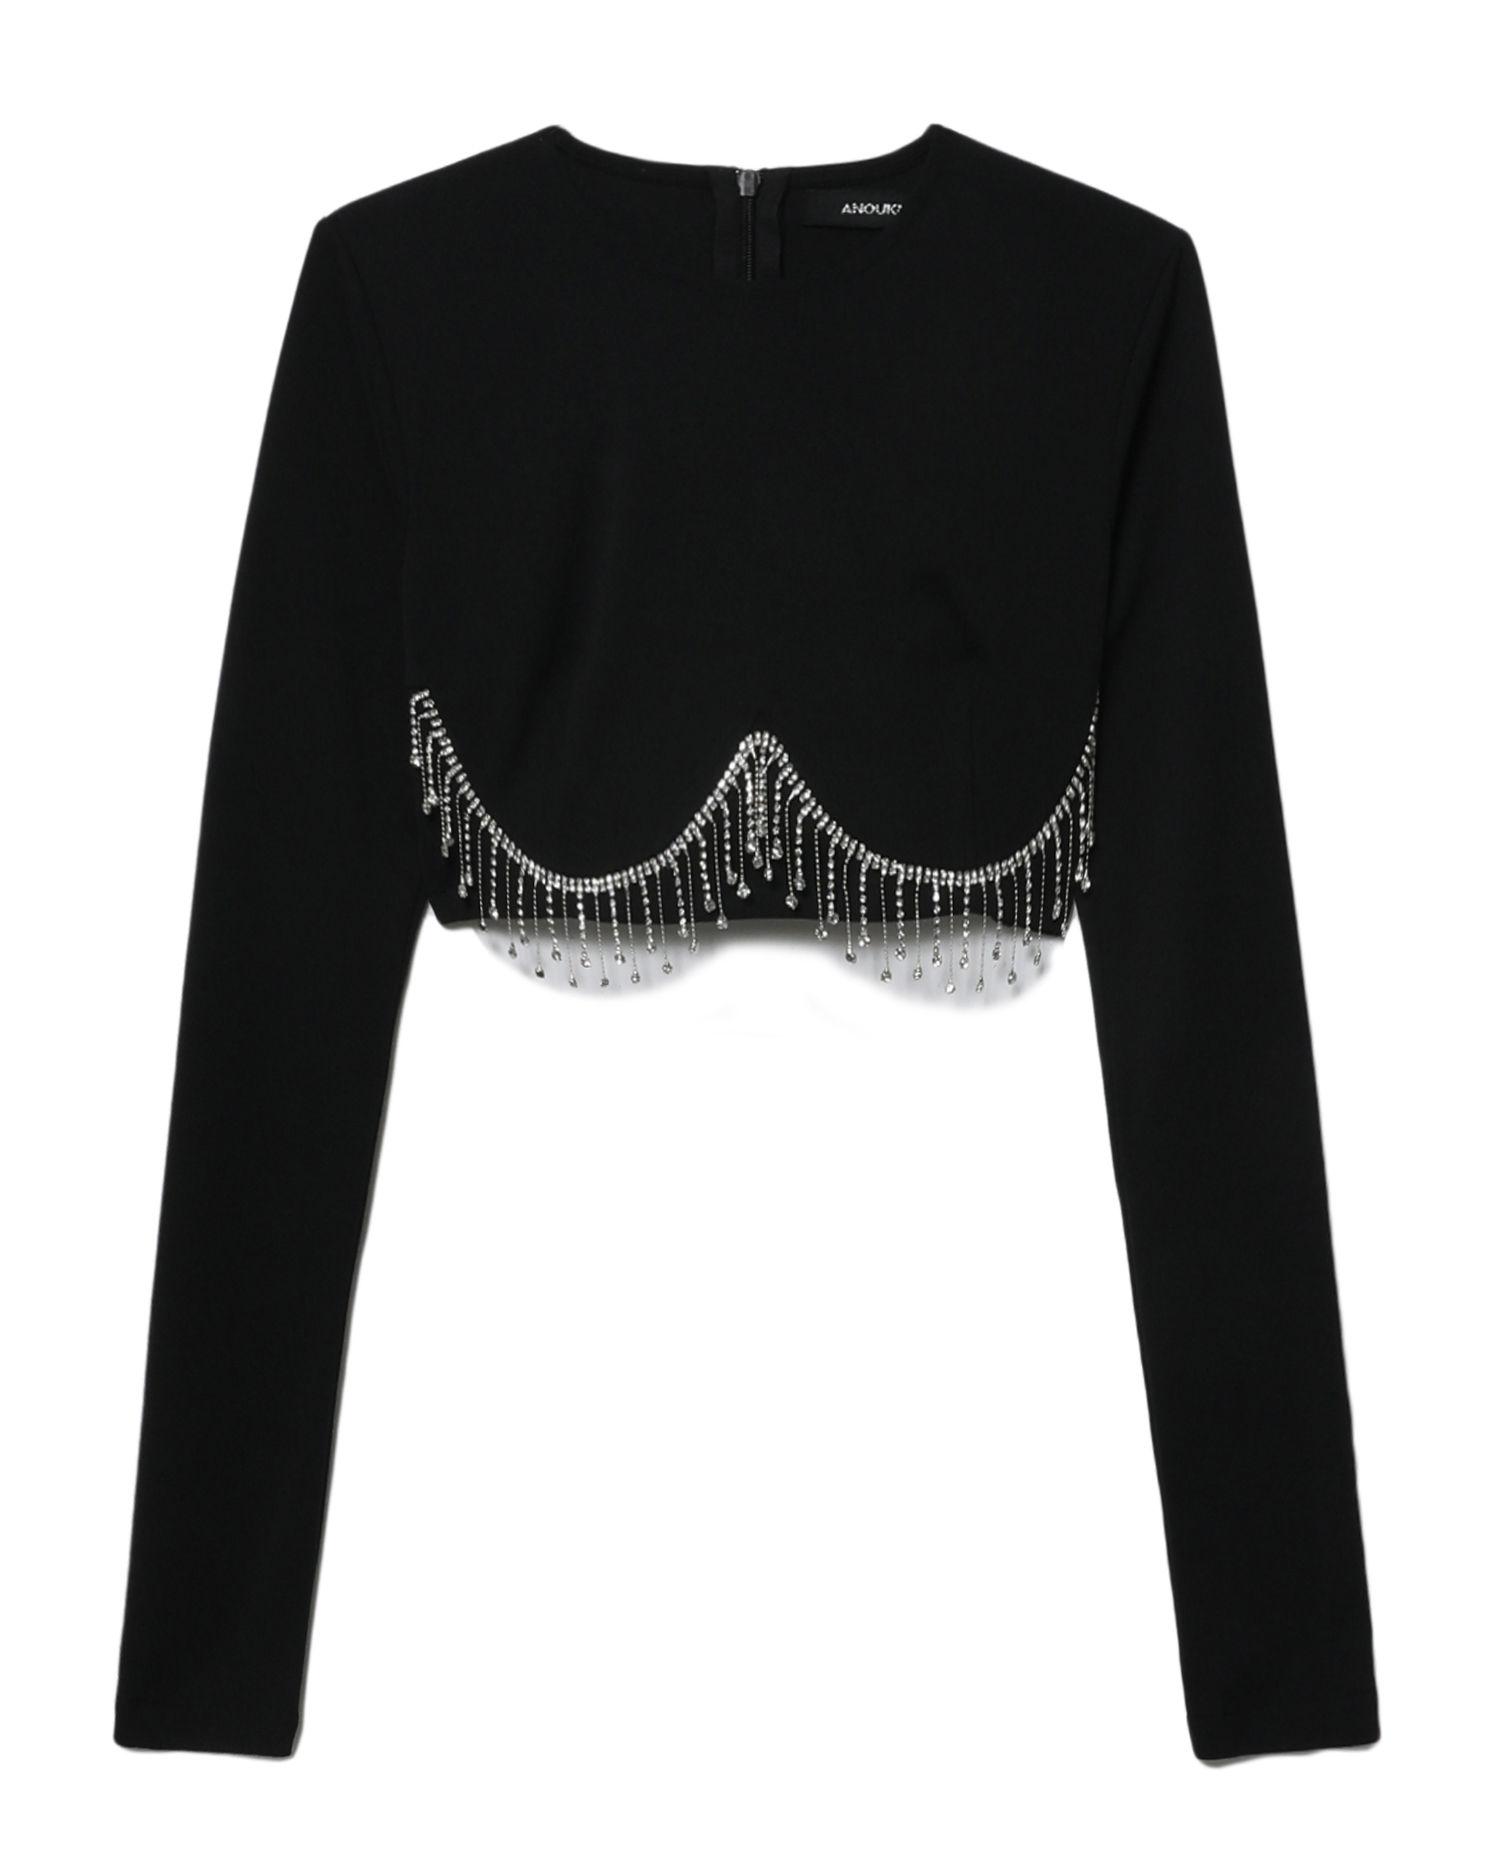 Crystal fringe crop top by ANOUKI